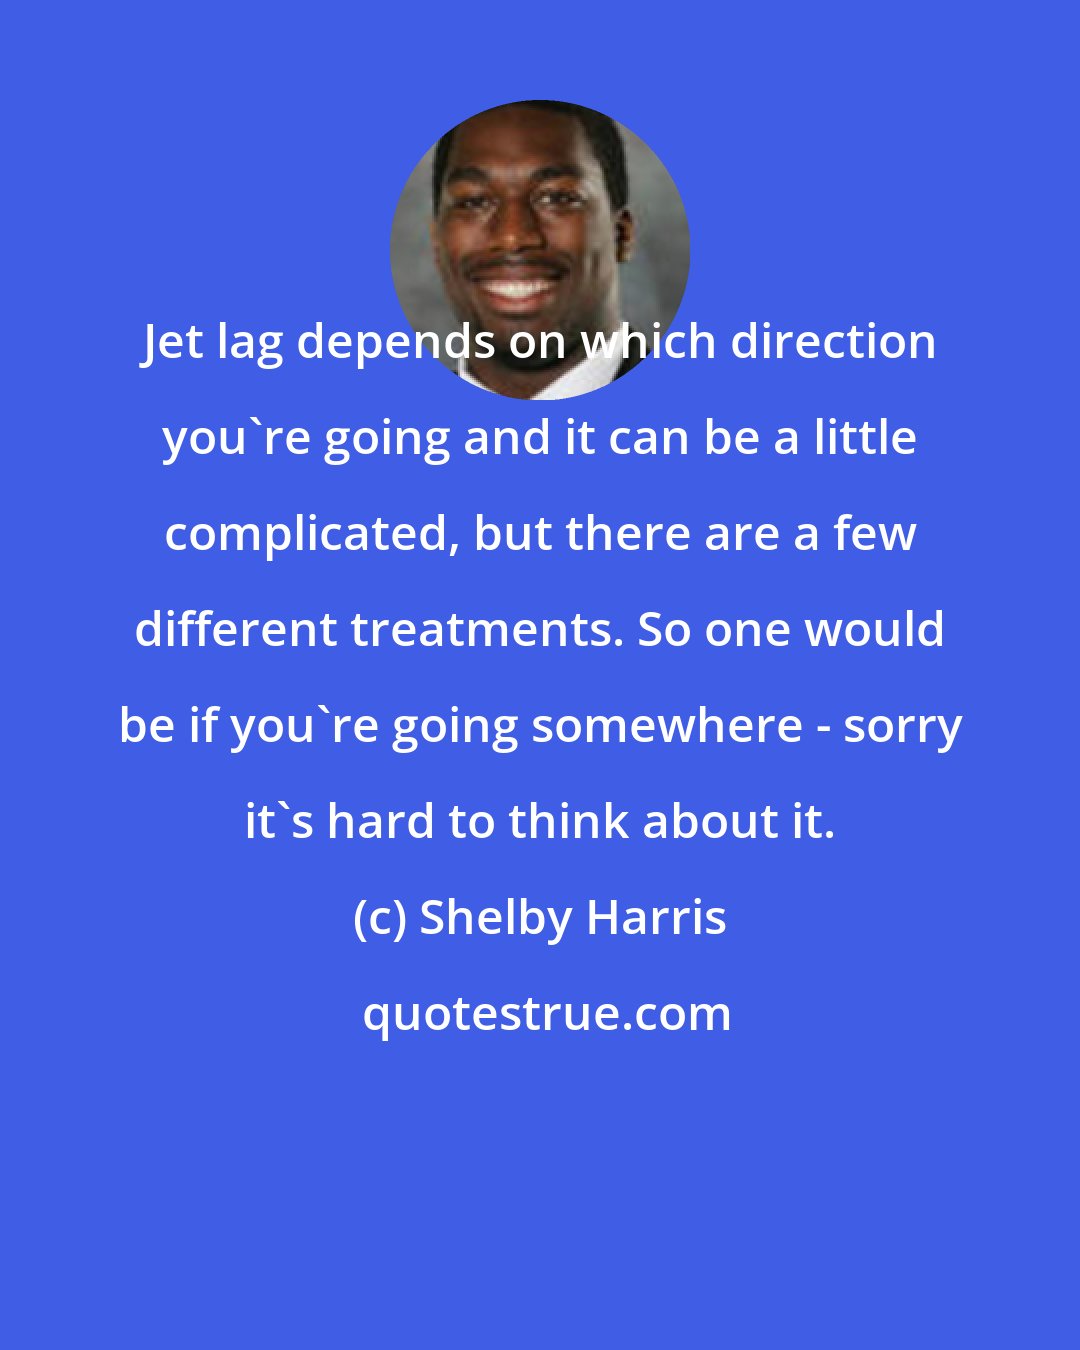 Shelby Harris: Jet lag depends on which direction you're going and it can be a little complicated, but there are a few different treatments. So one would be if you're going somewhere - sorry it's hard to think about it.